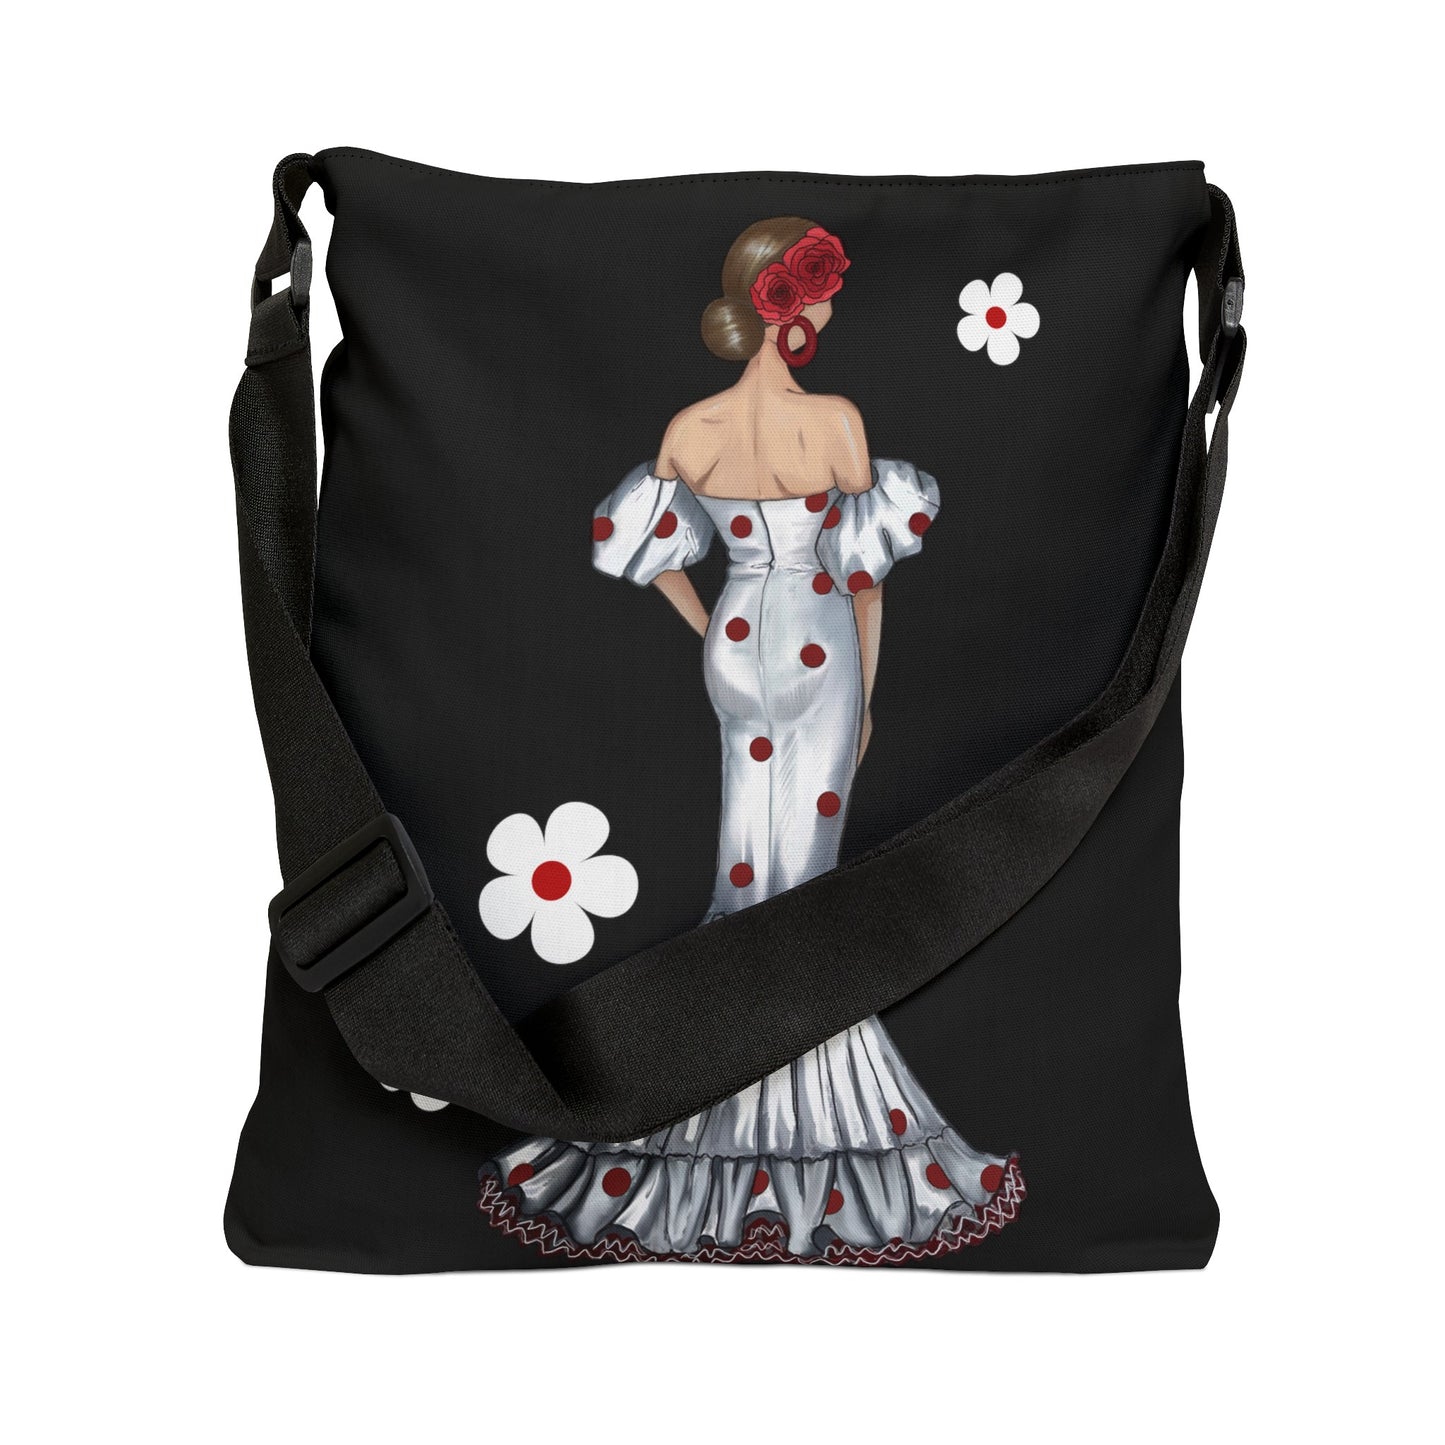 Adjustable Handle Tote Bag - Customizable, Maite with Black Background and White Flowers